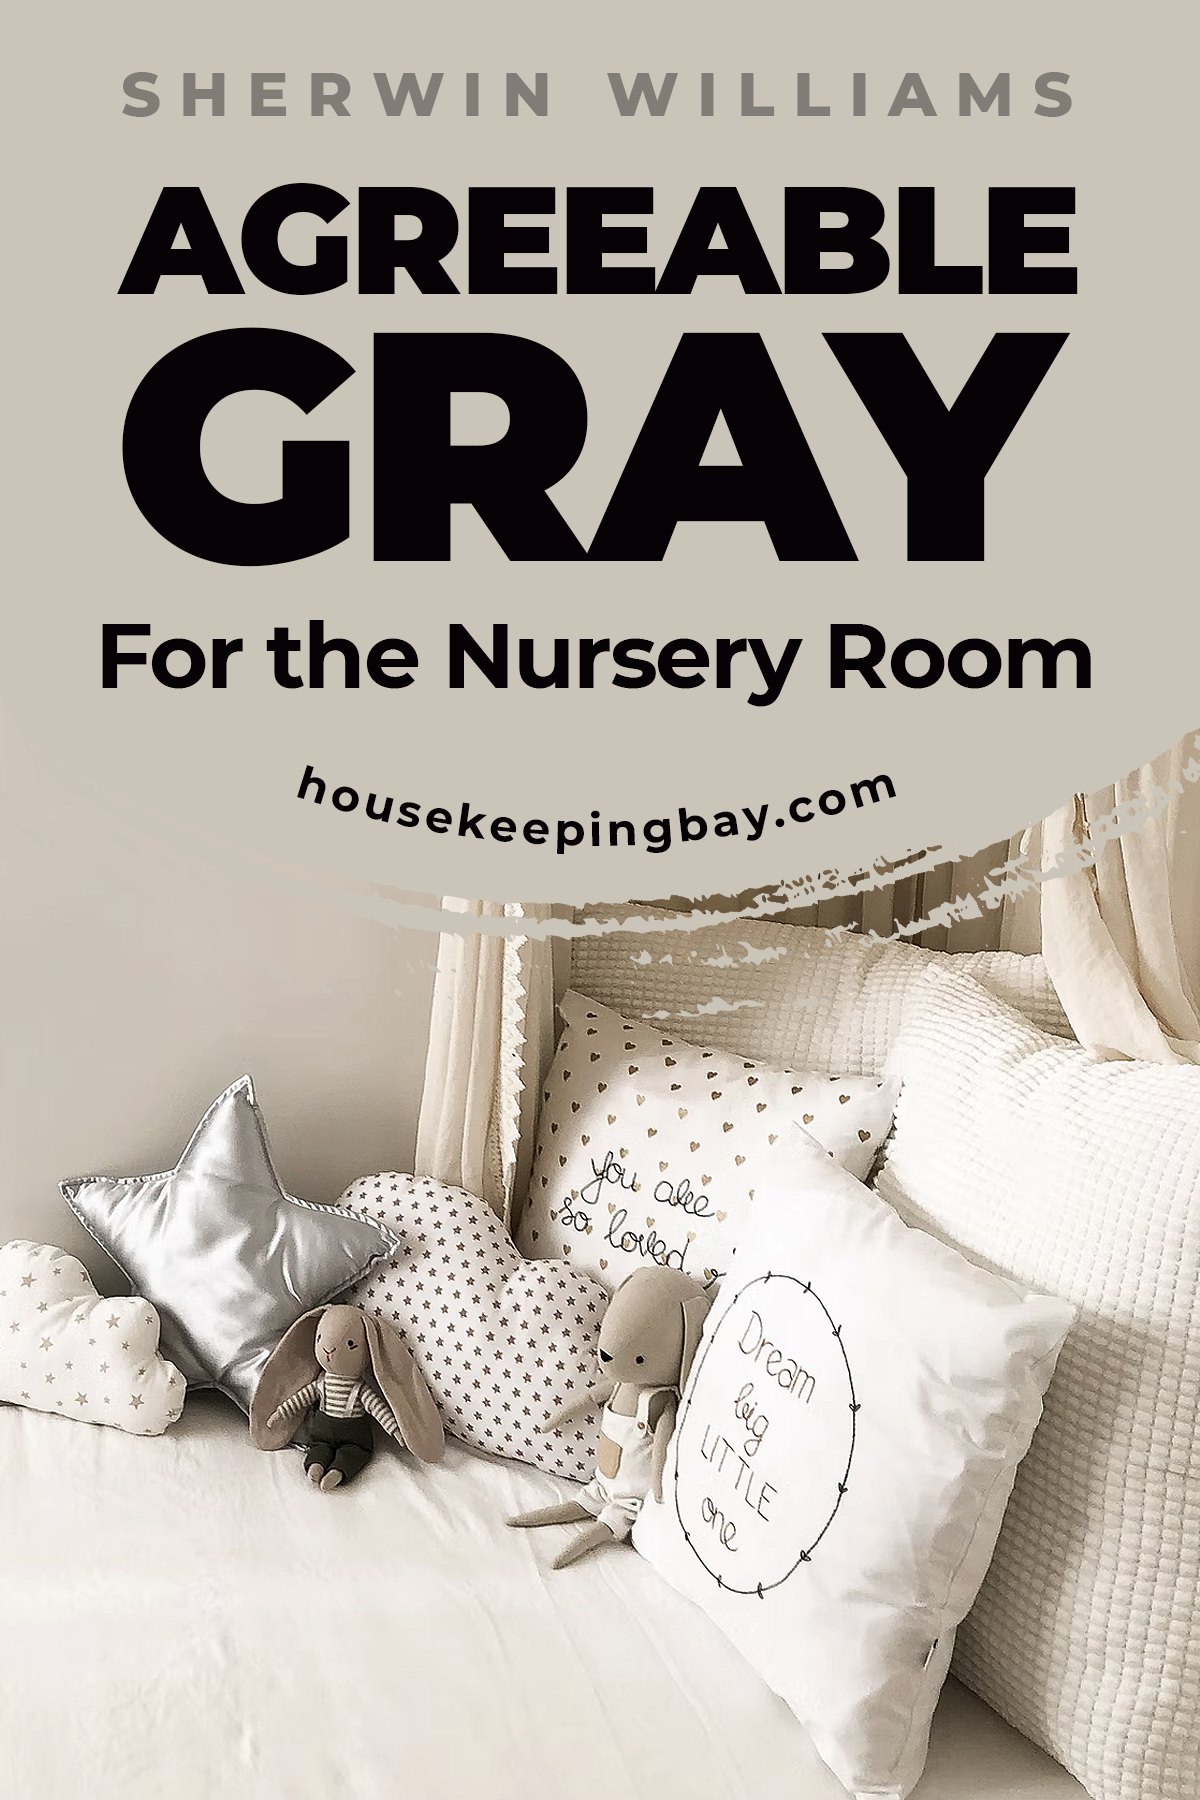 Agreeable Gray For the Nursery Room